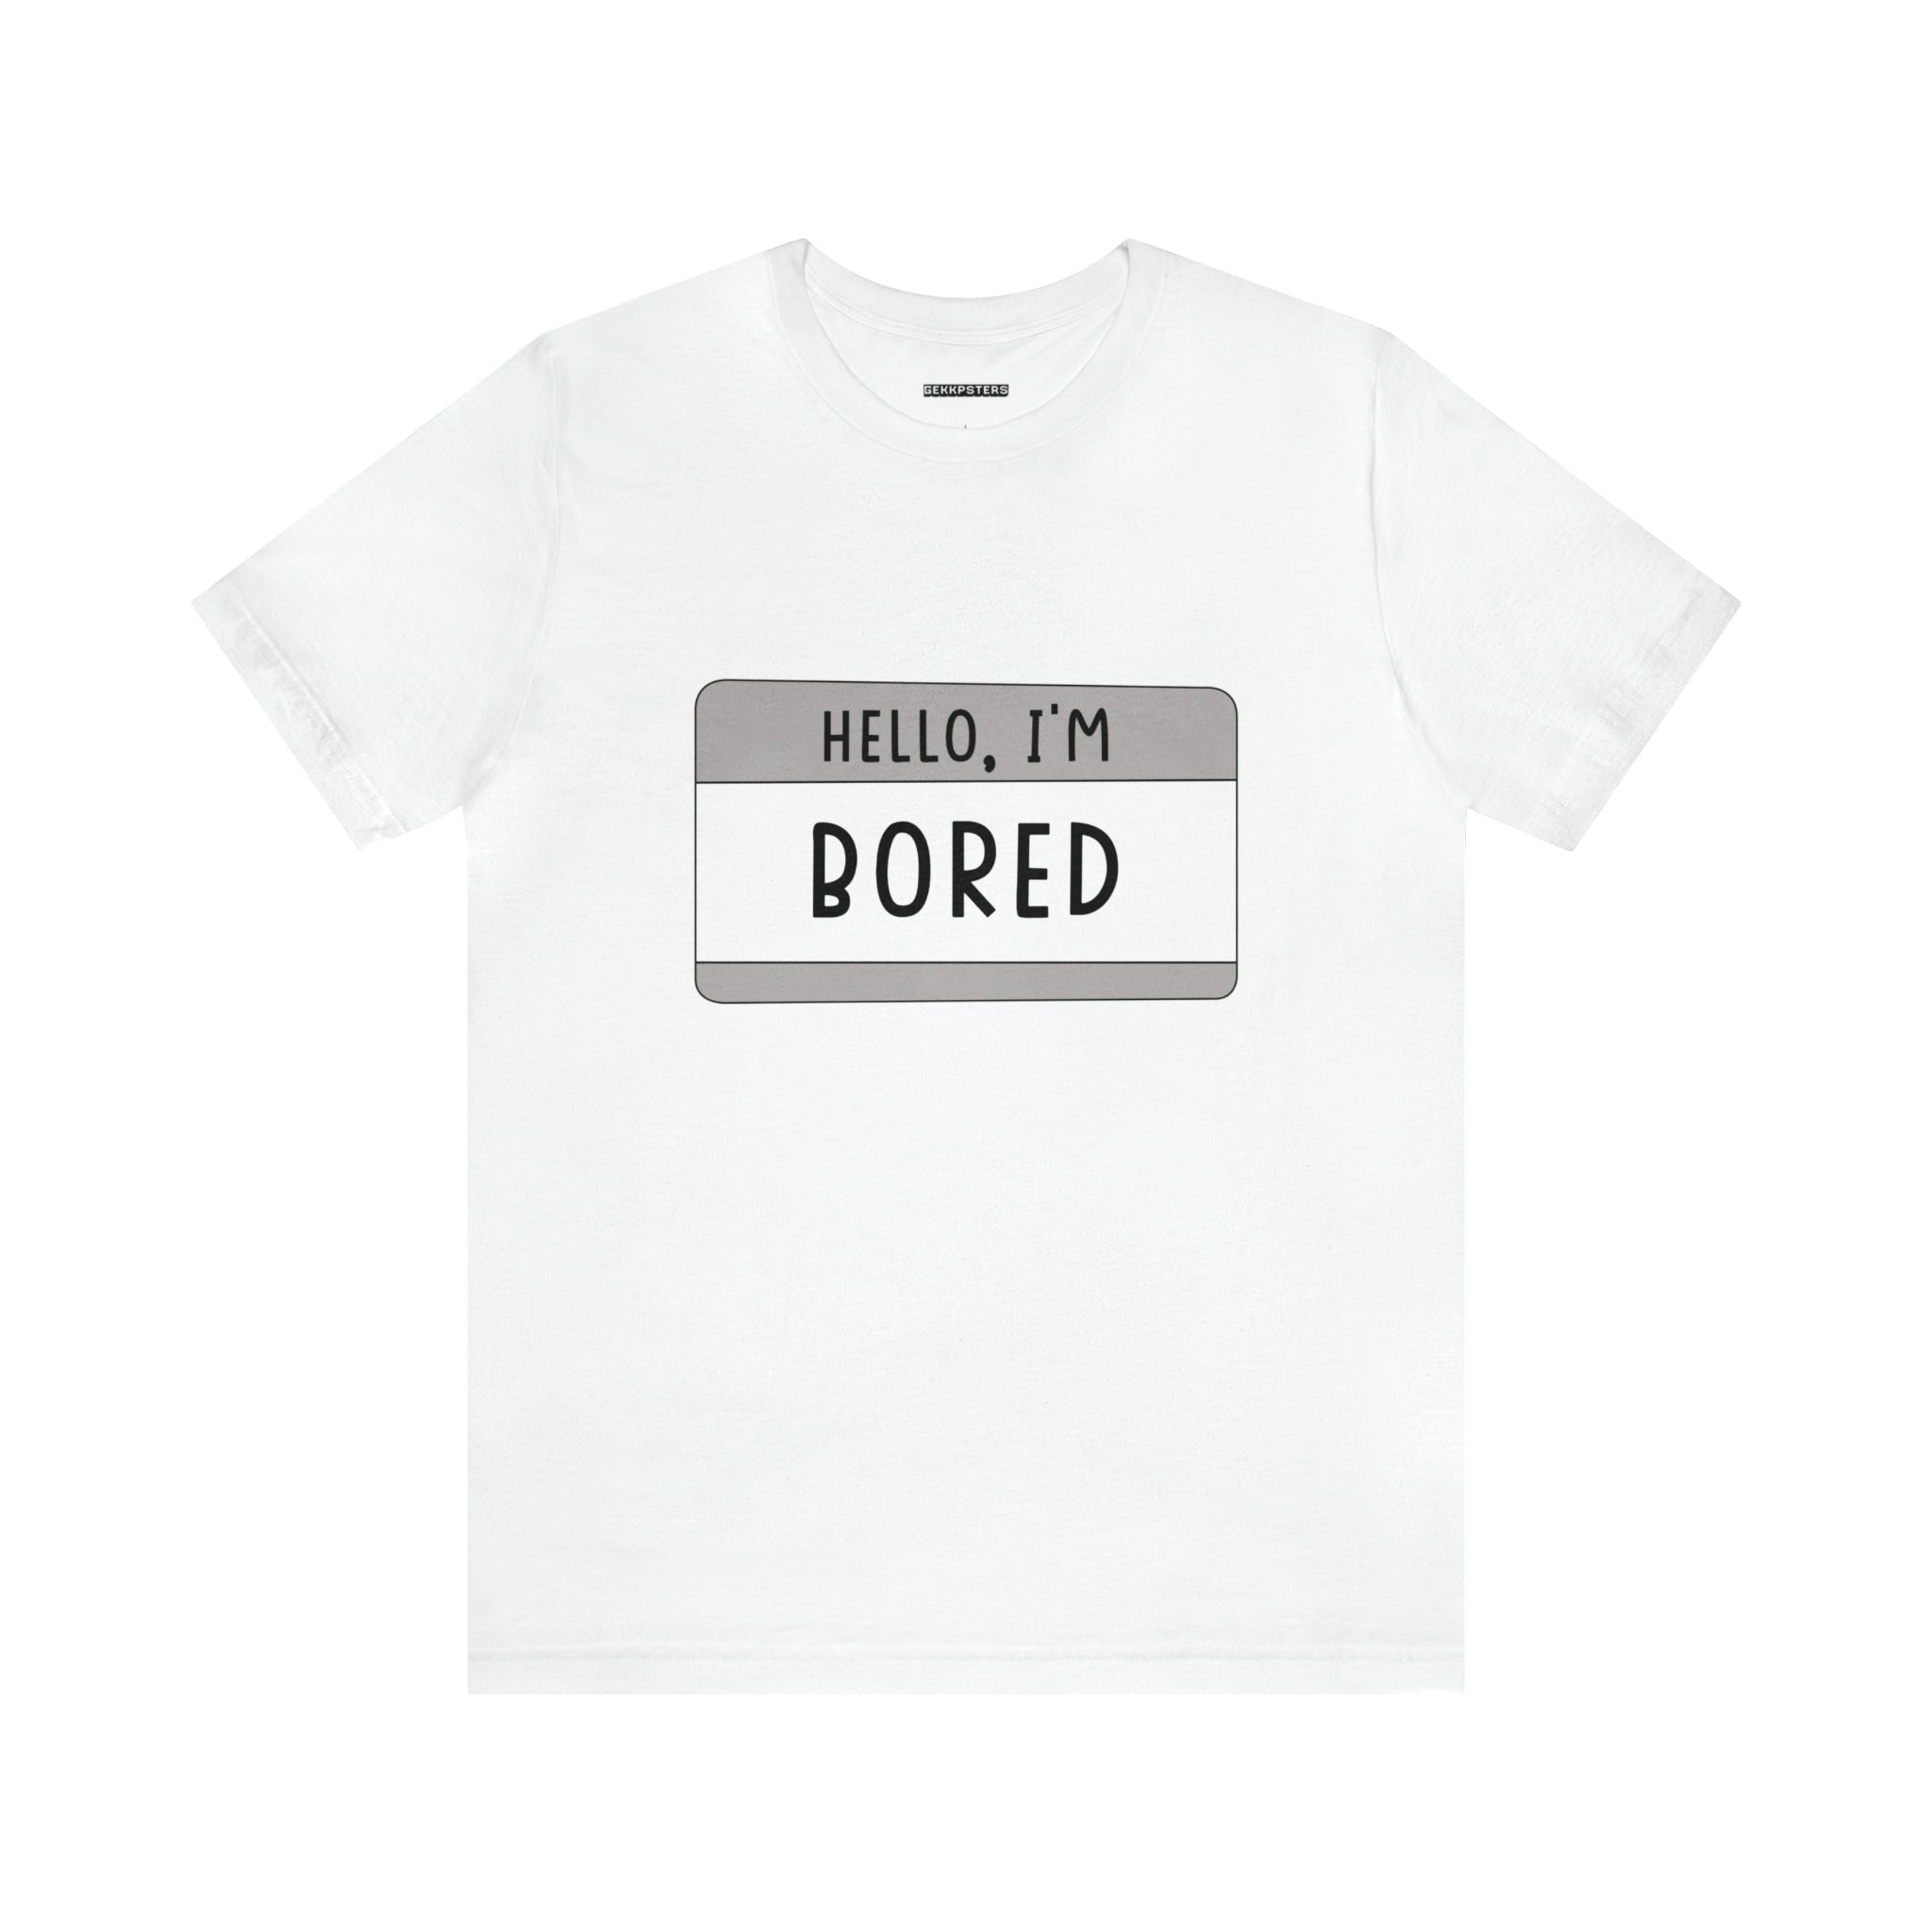 Feeling bored? Pick up this Hello, I'm Board T-Shirt and add a little fun to your day!